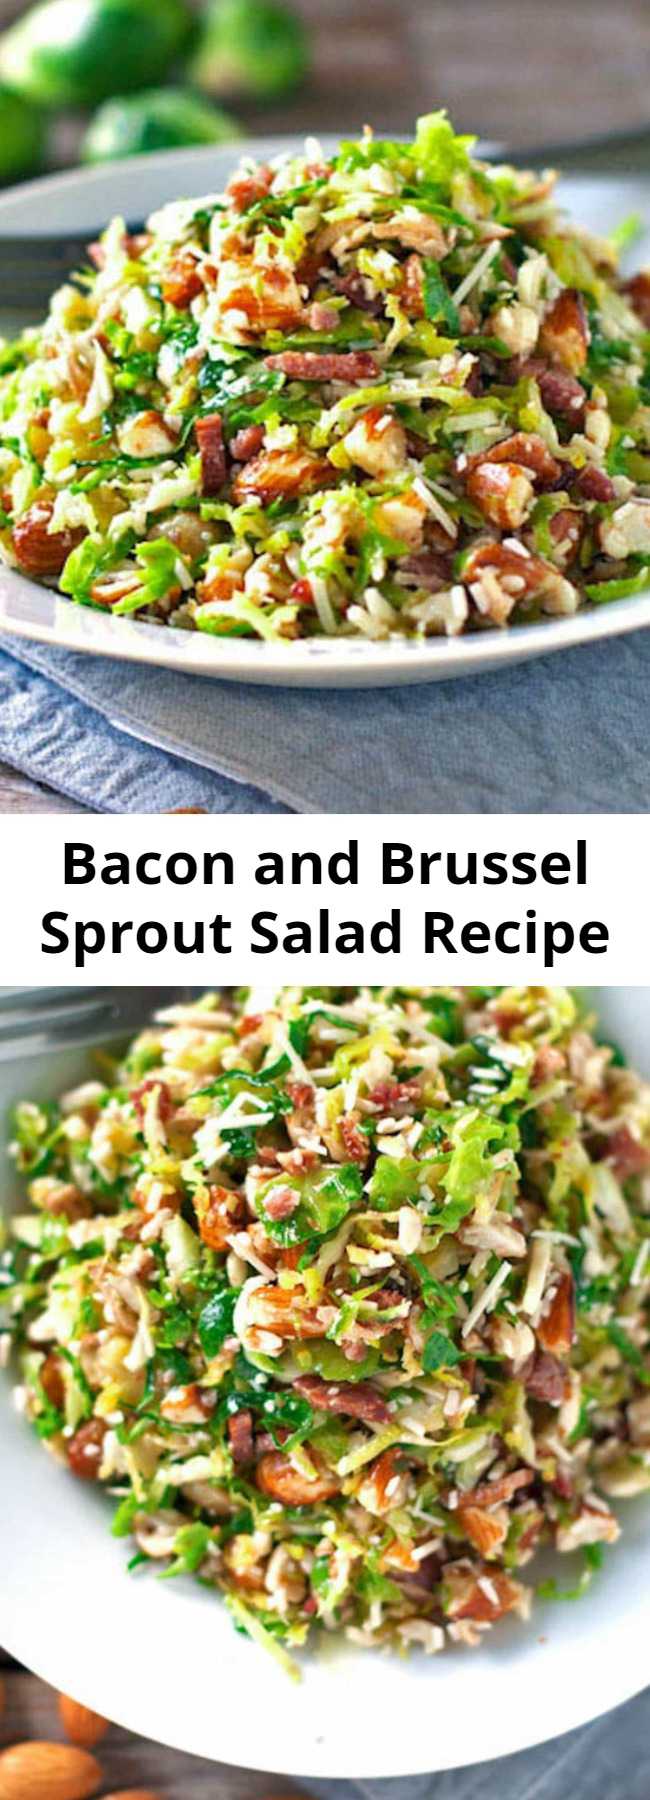 Bacon and Brussel Sprout Salad Recipe - This bacon and brussel sprout salad is so good! Thinly sliced brussel sprouts, crumbled bacon, Parmesan, almonds, and shallot citrus dressing. #salad #brusselsprout #thanksgiving #sides #recipe #easy #bacon